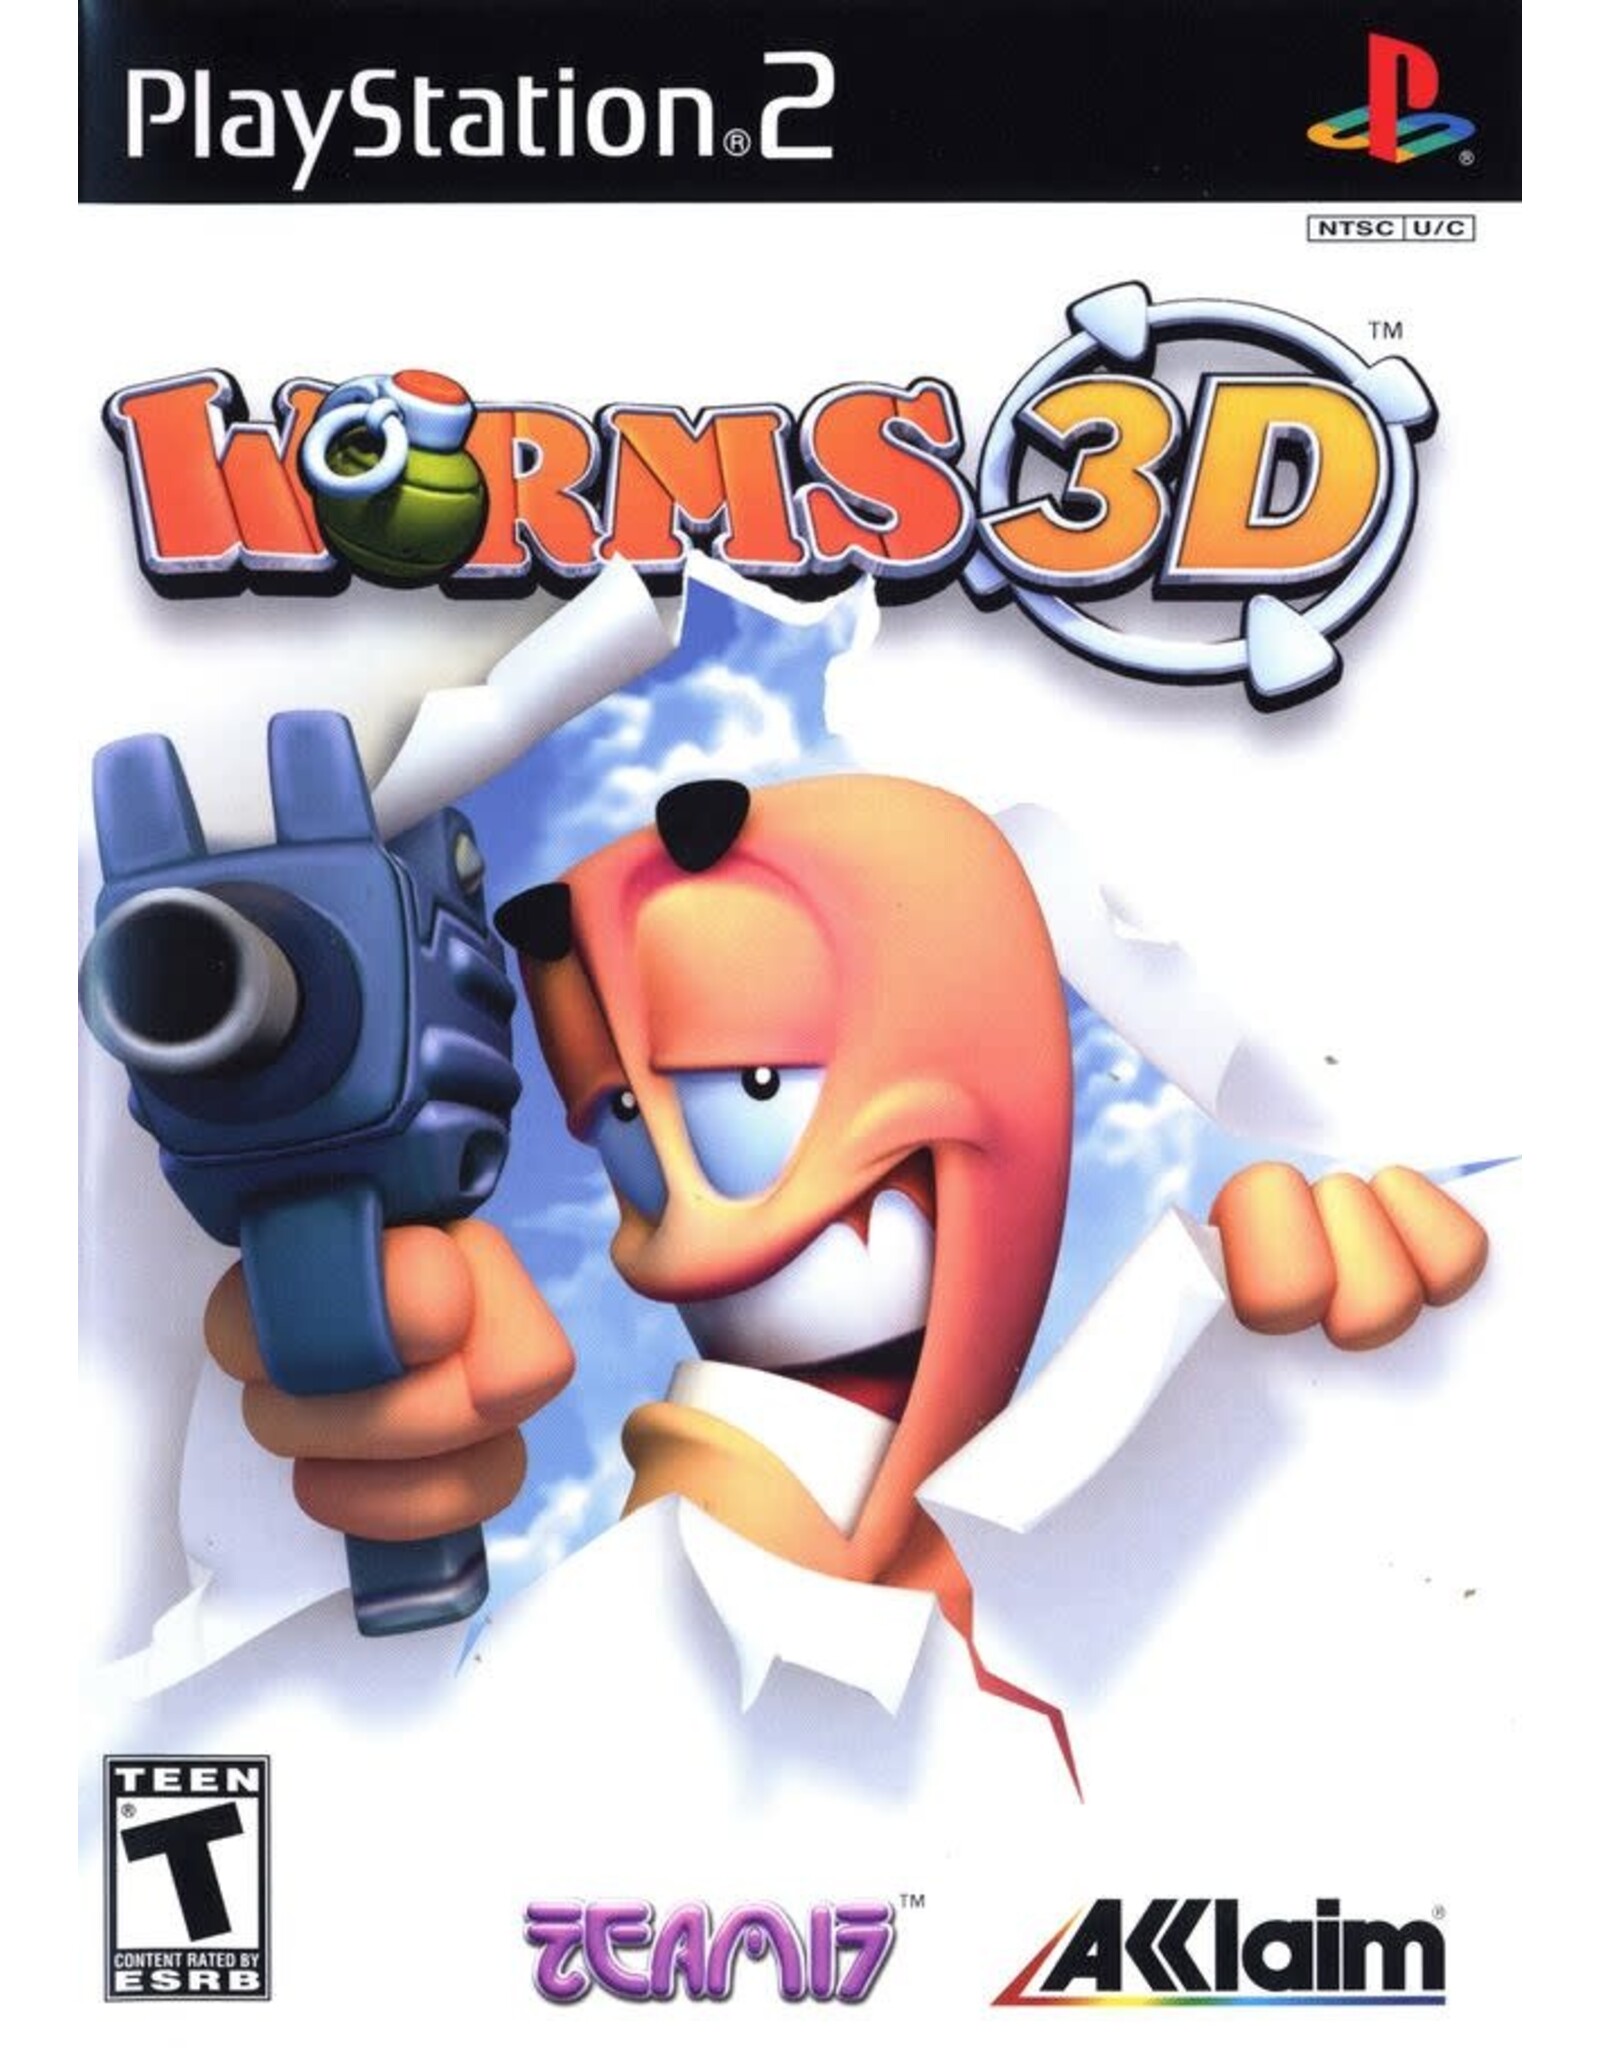 Playstation 2 Worms 3D (Used)